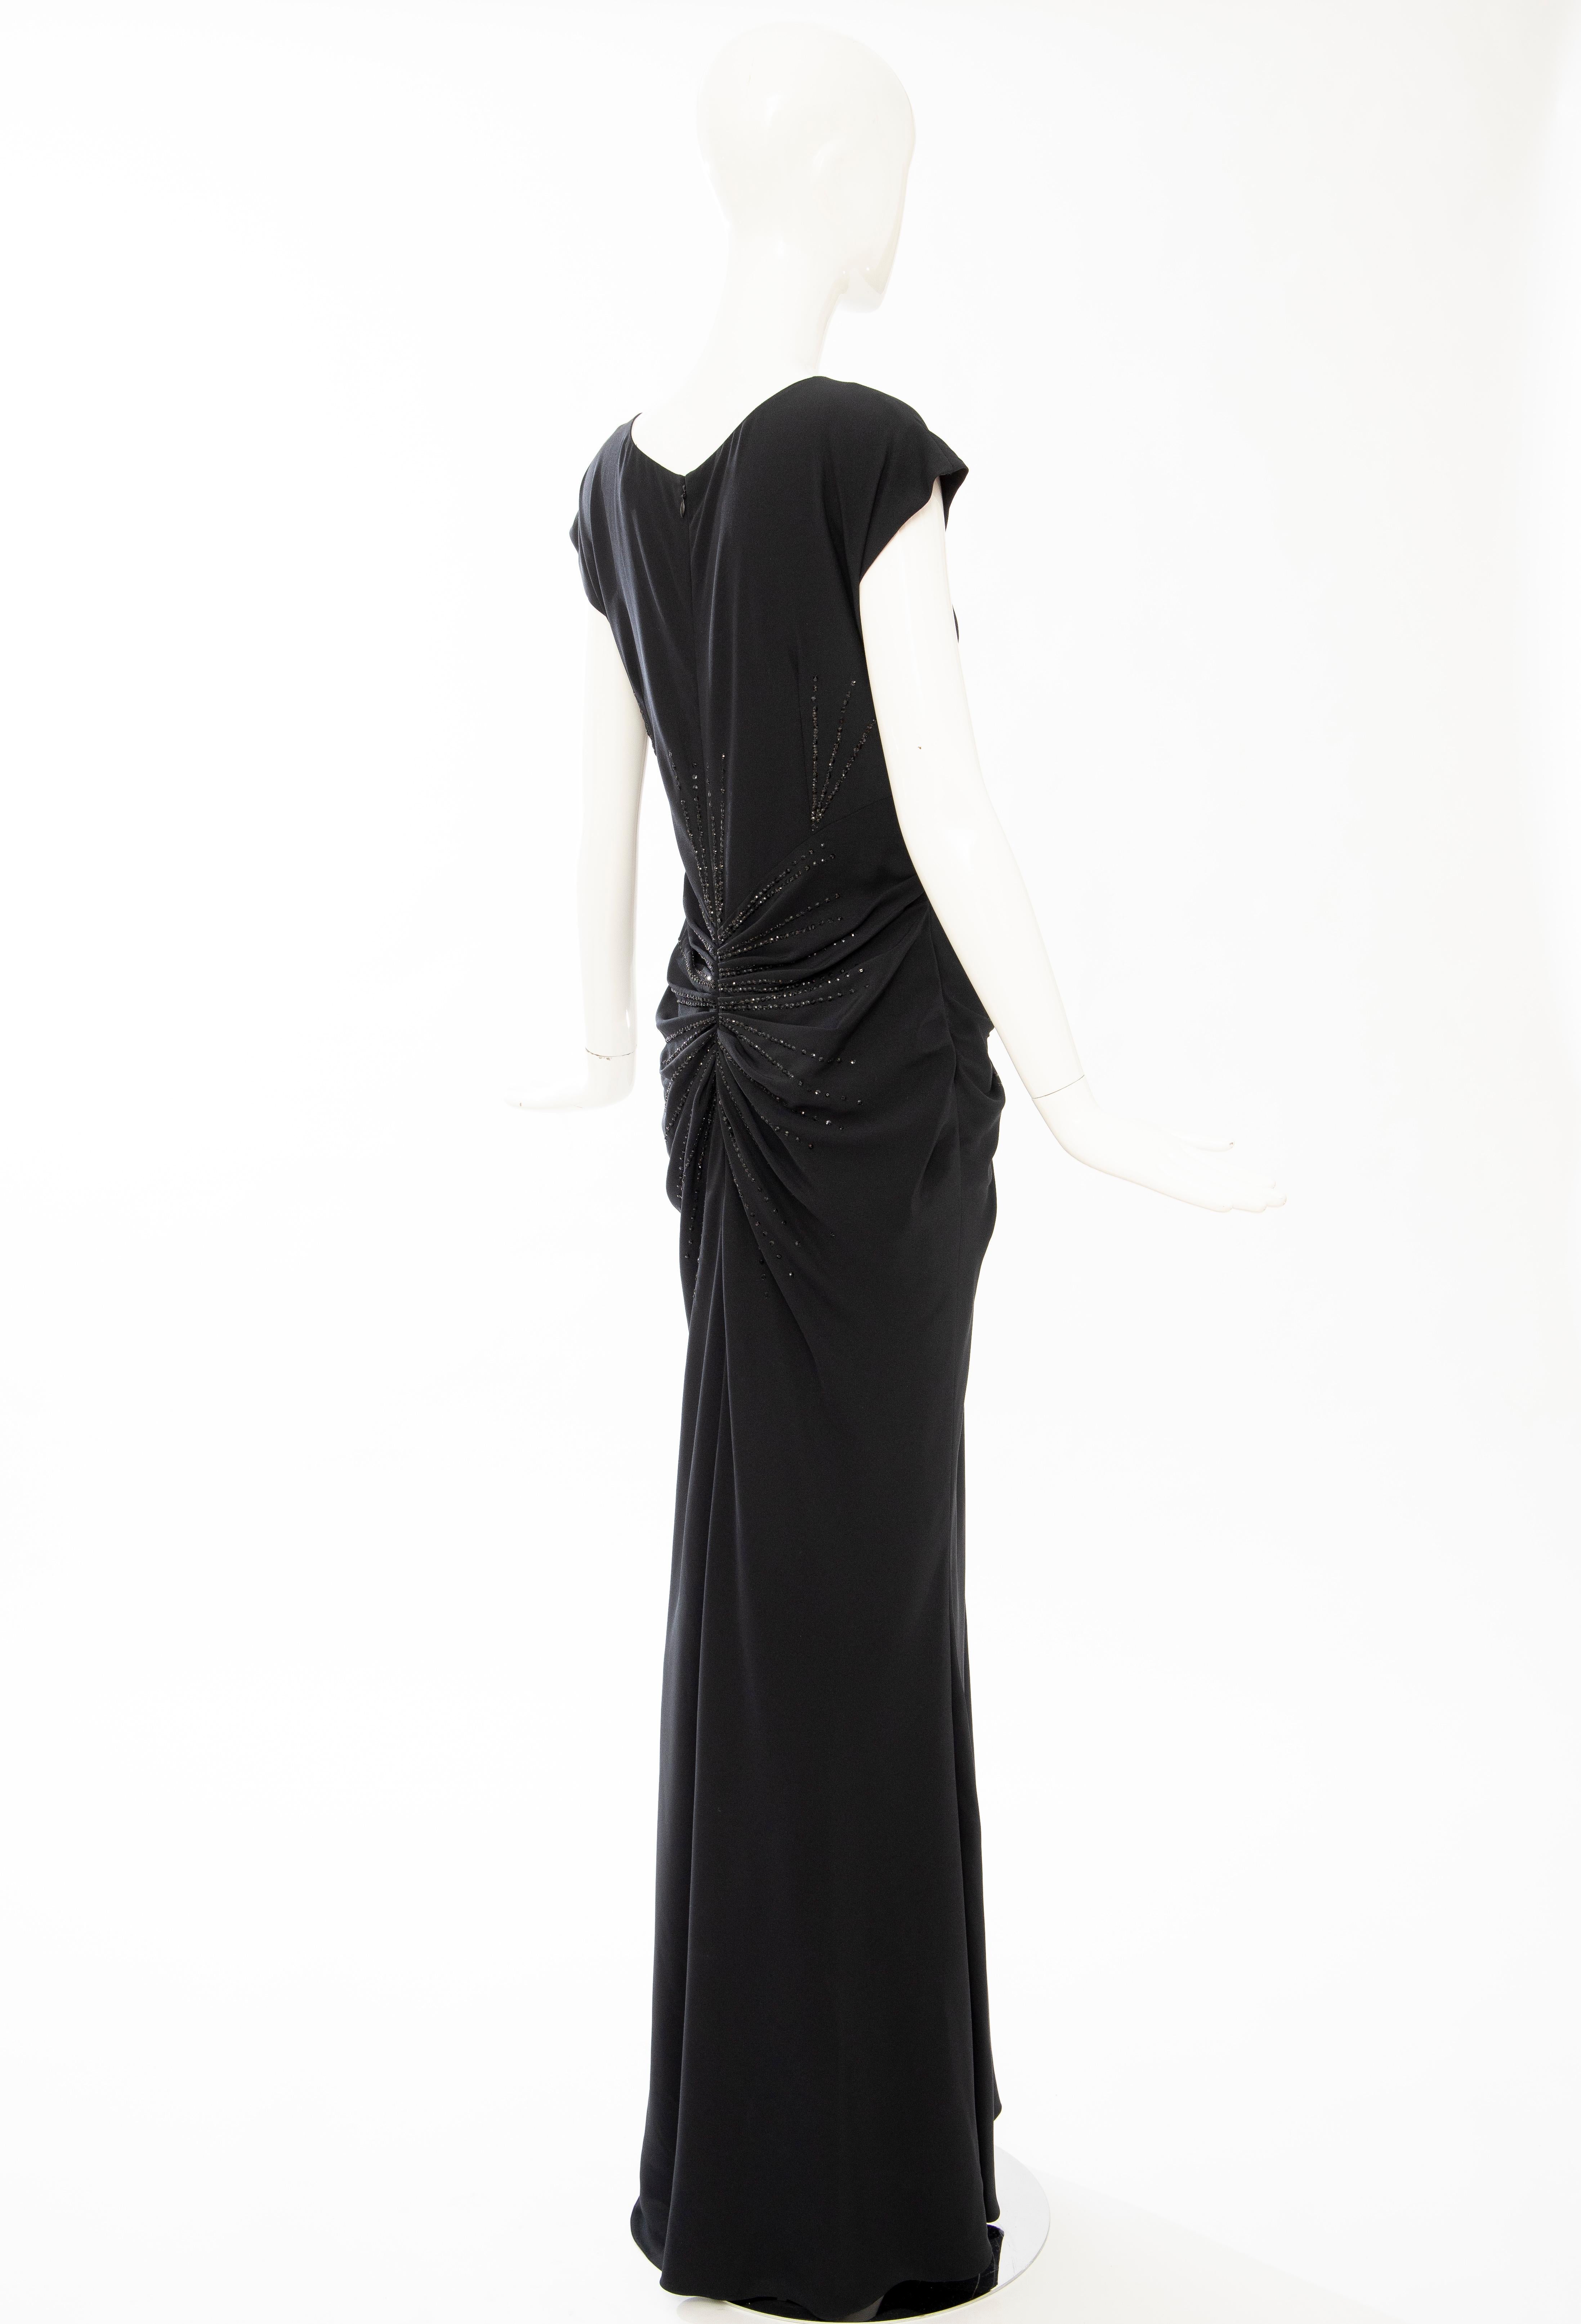 John Galliano for Christian Dior Black Embroidered Evening Dress, Spring 2008 2